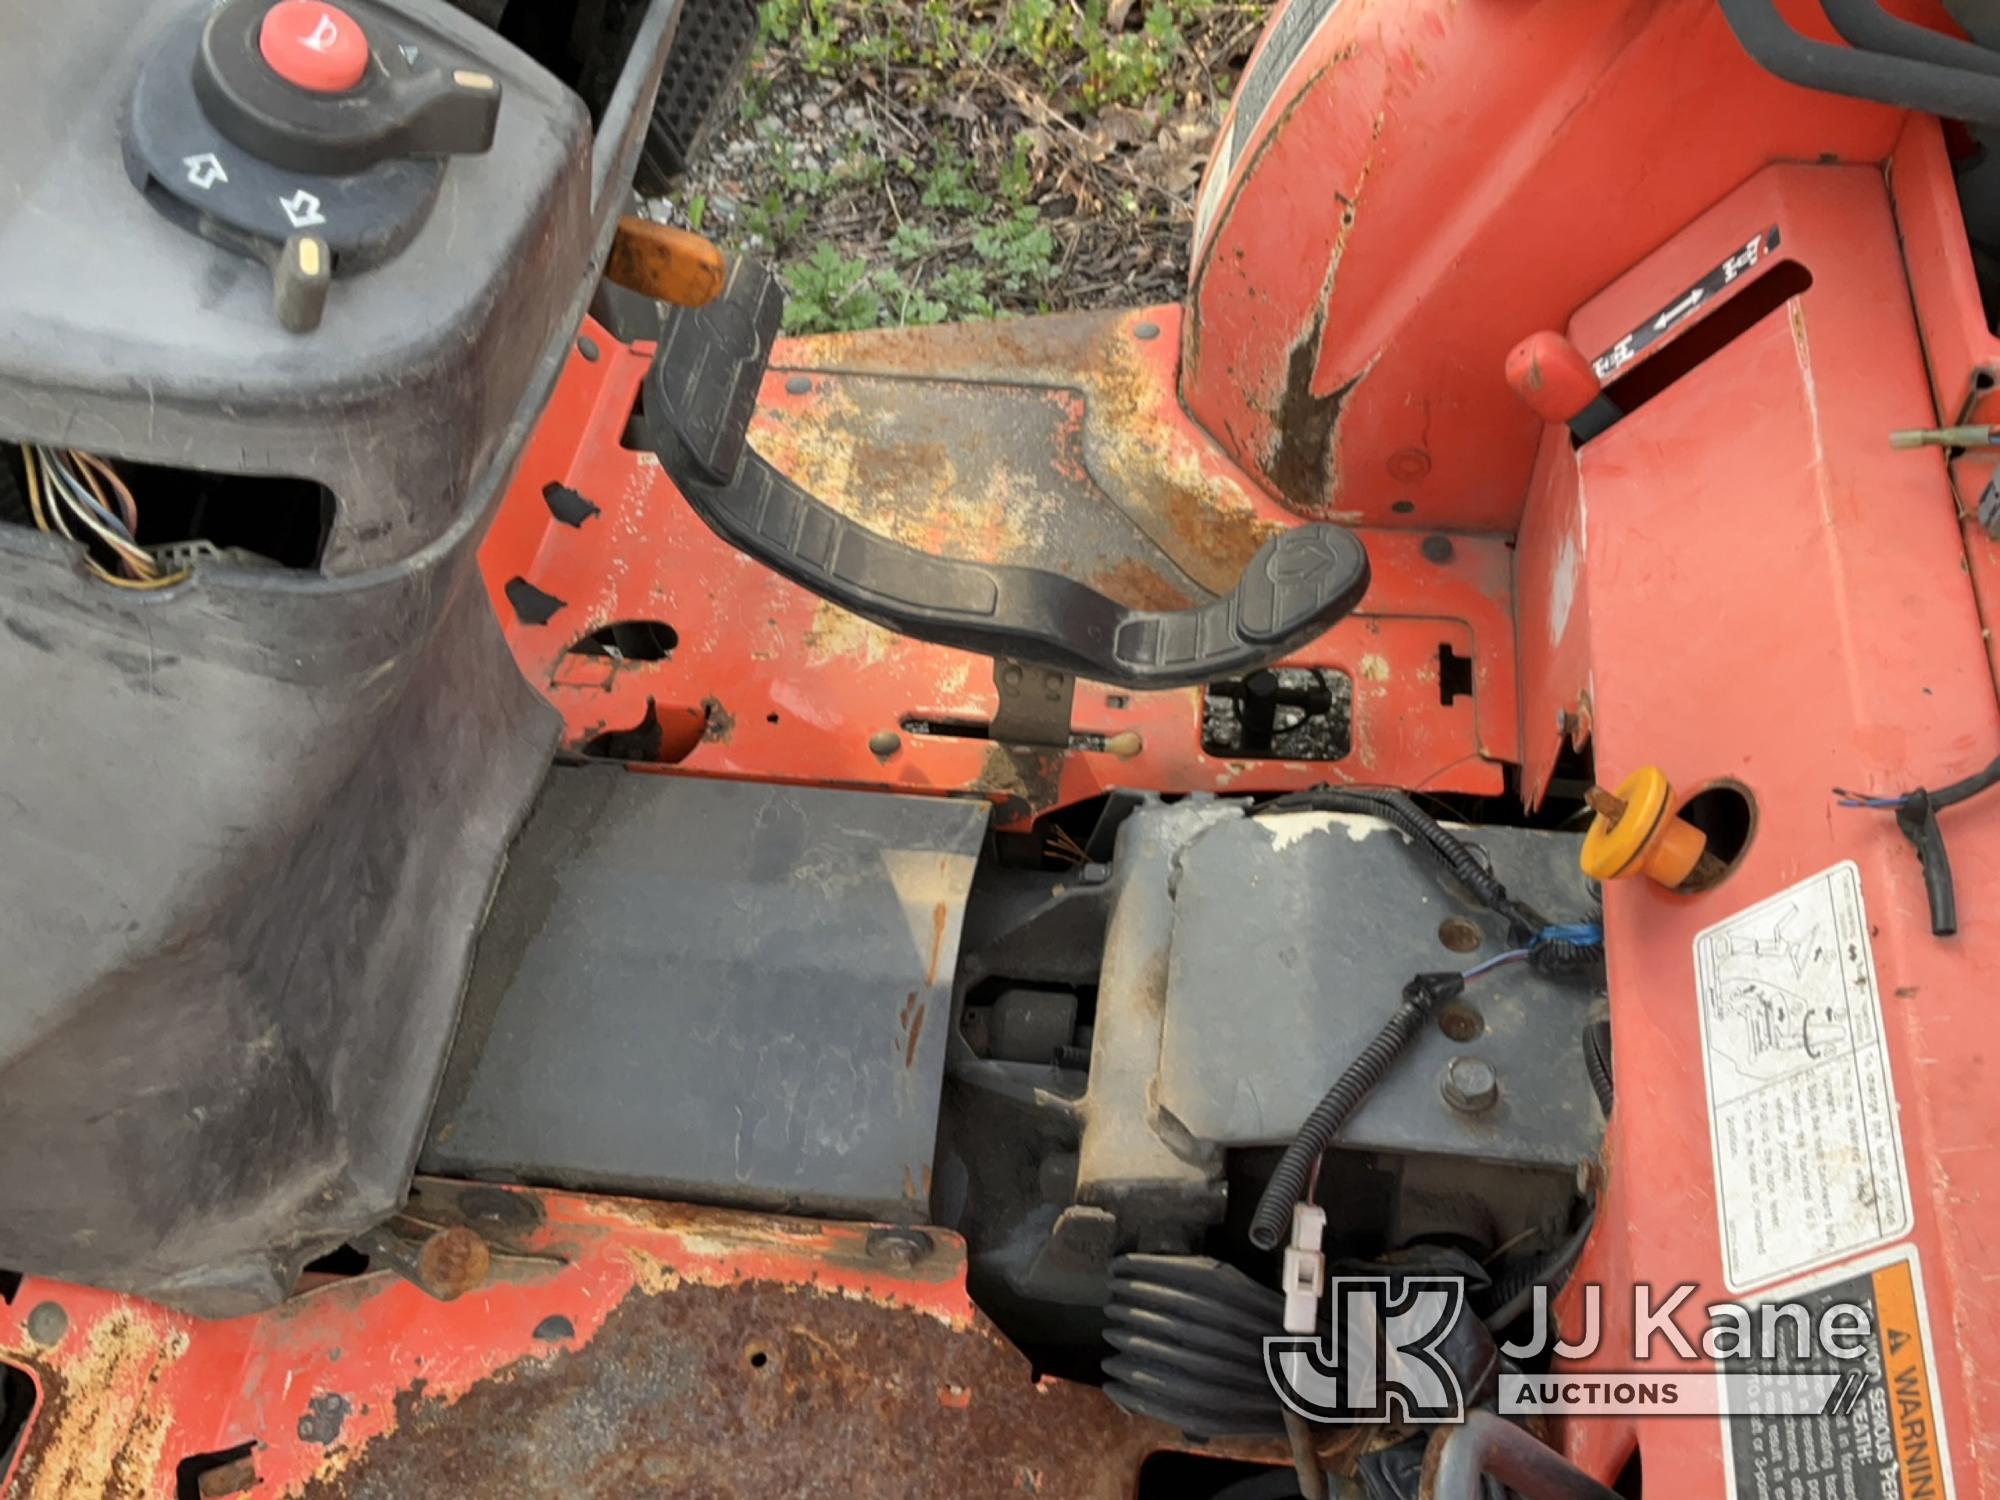 (Bellport, NY) 2012 Kubota B26 Utility Tractor Not Running, Condition Unknown, Missing Parts) (Note: